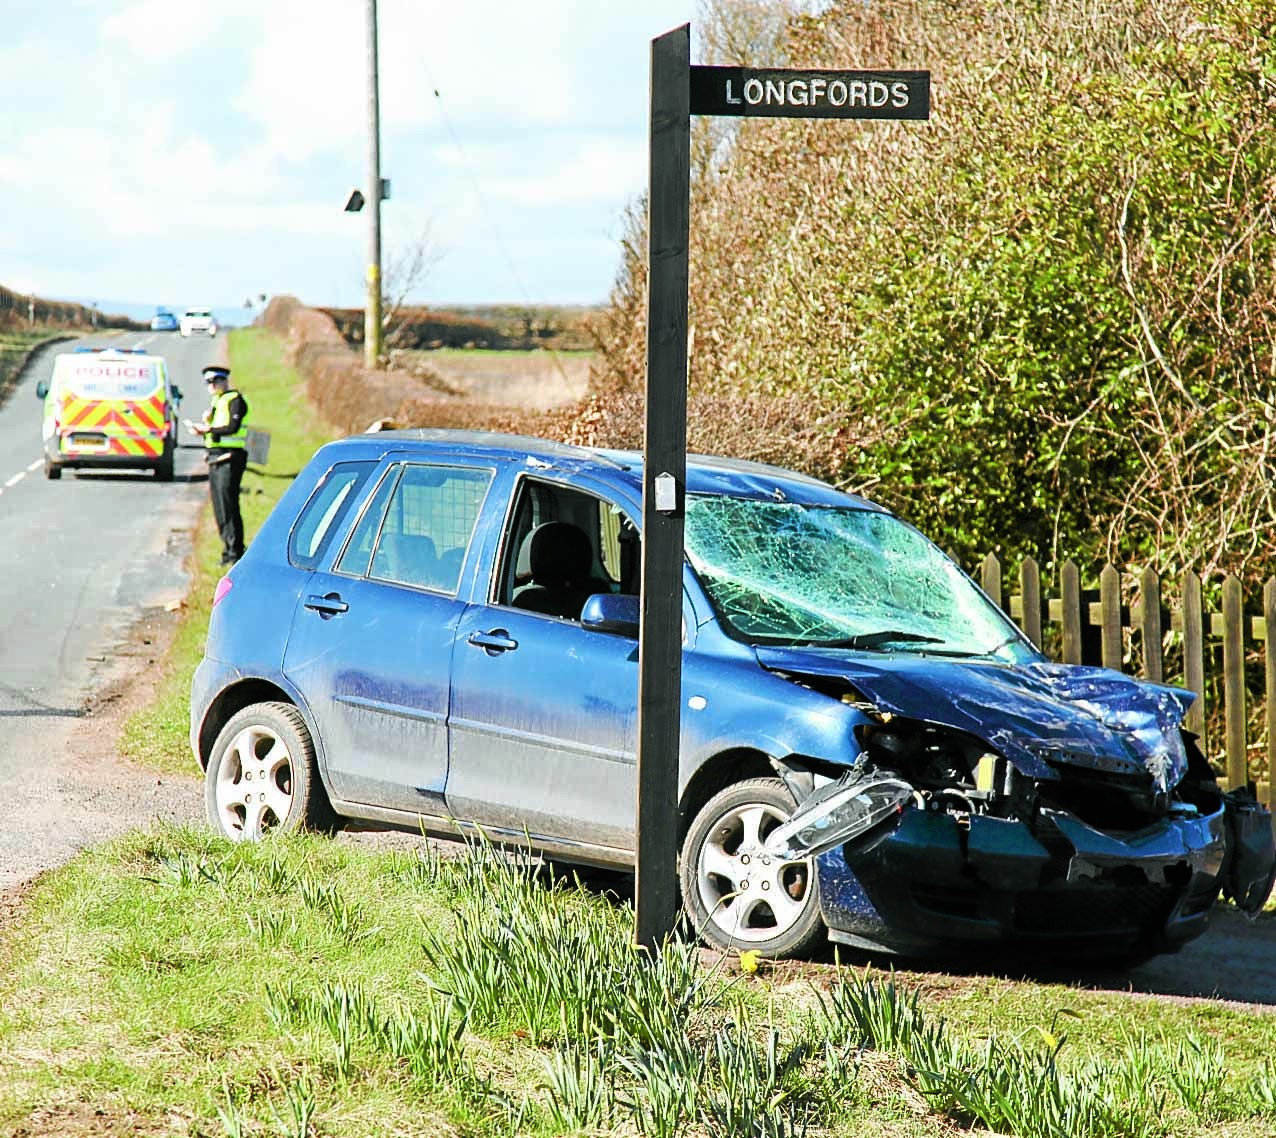 Emergency services called to Low Road crash